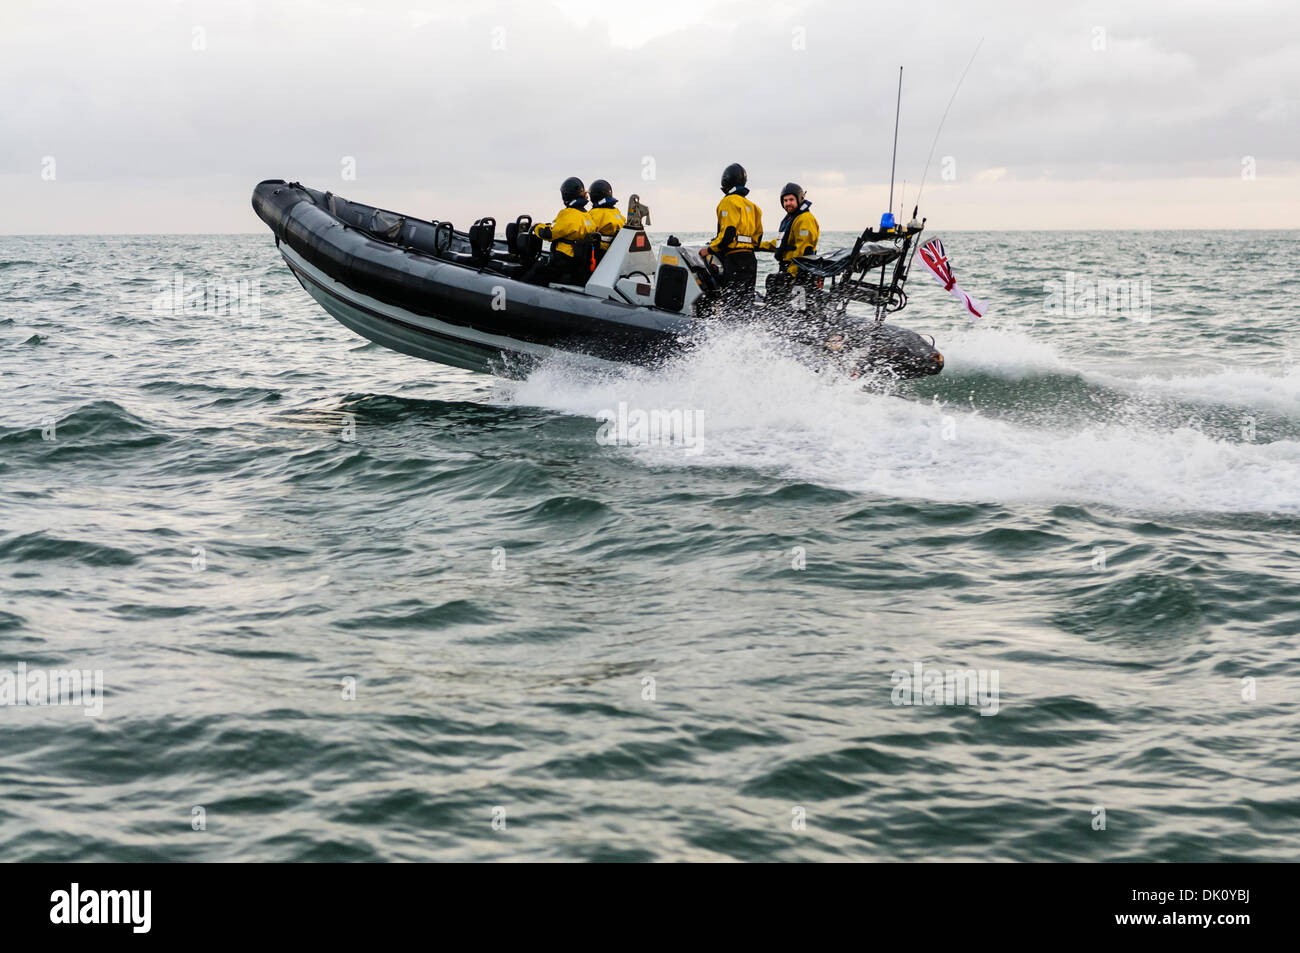 Belfast, Northern Ireland. 30th Nov 2013 - A Royal Navy VT Halmatic Pacific 22 pursuit RIB splashes over waves at speed with four passengers on board wearing dry-suits. Credit:  Stephen Barnes/Alamy Live News Stock Photo